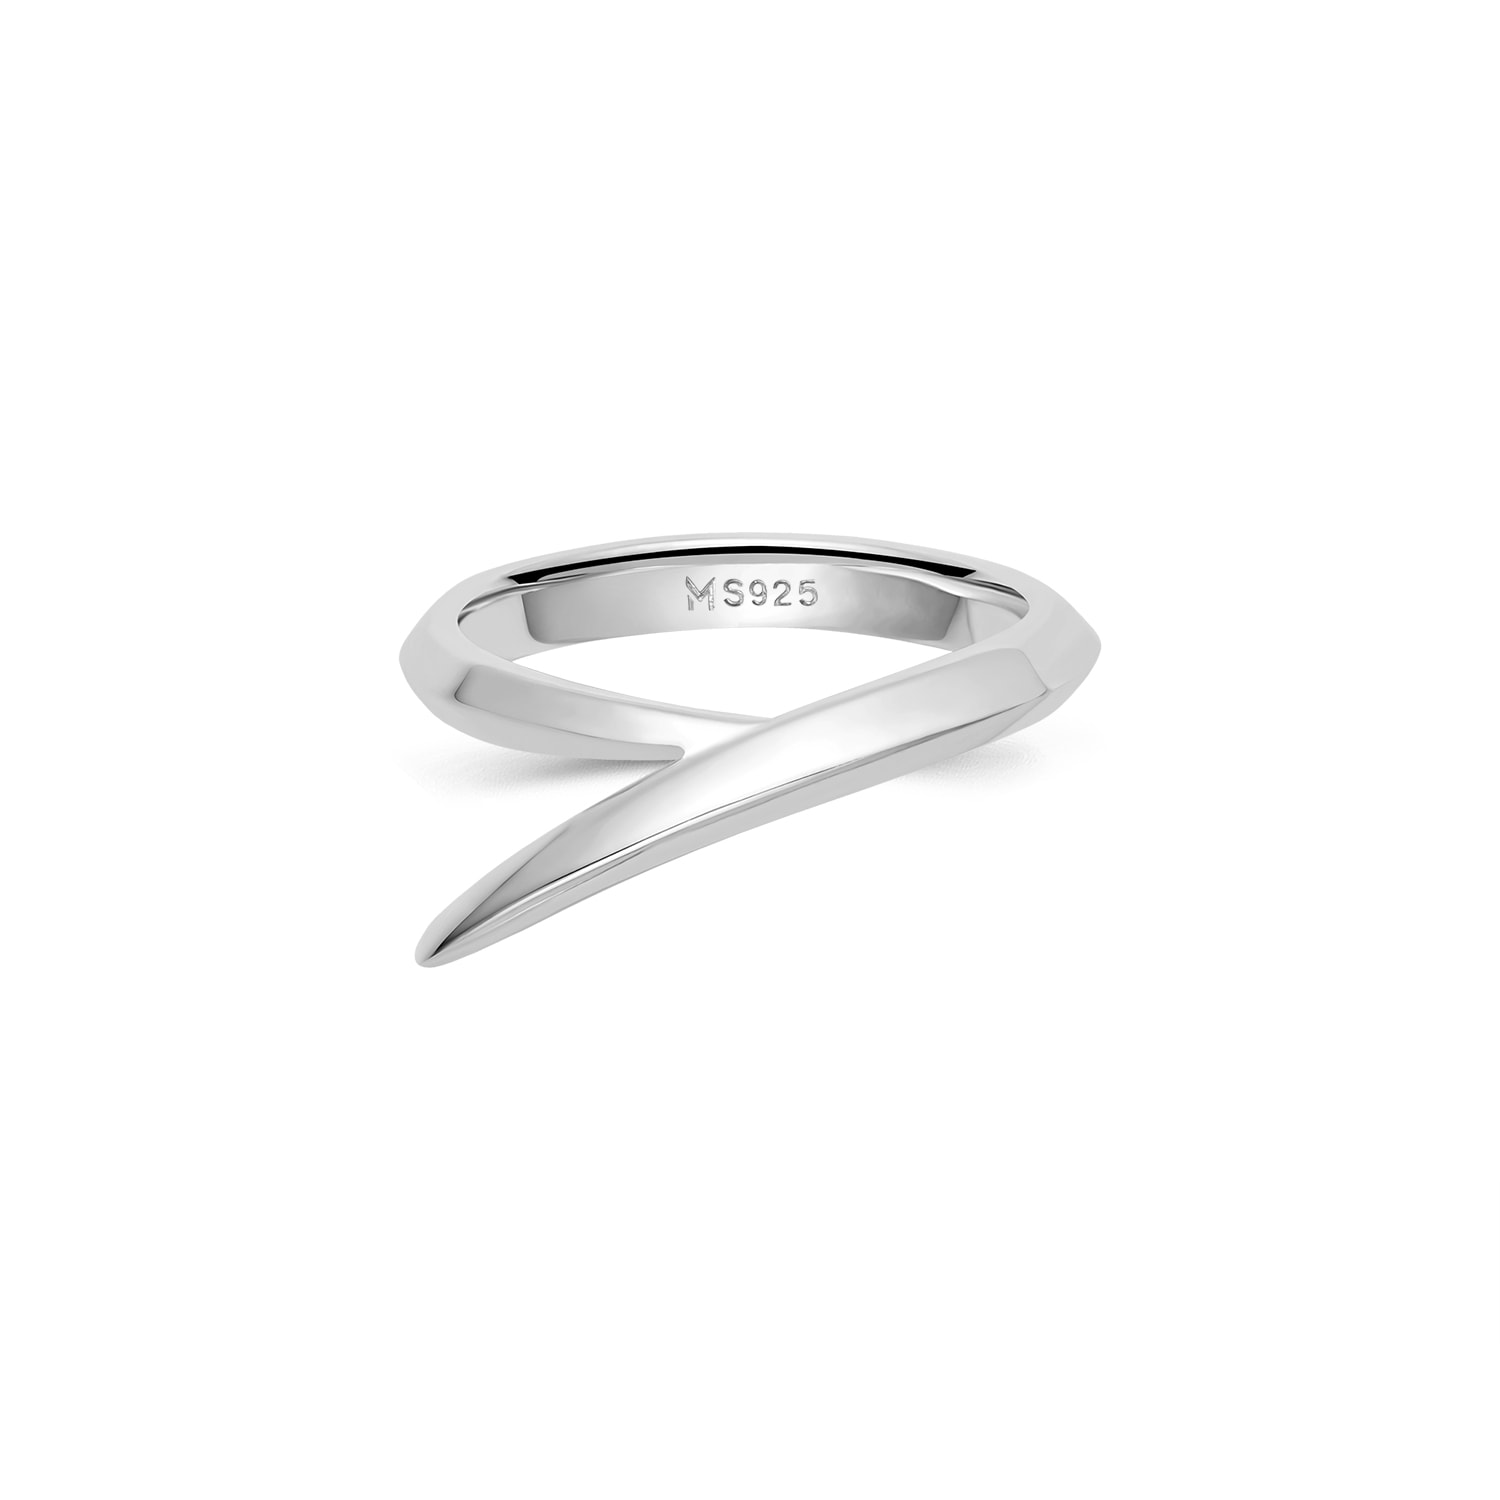 Meulien Women's Pointed Curve Ring - Silver In Metallic